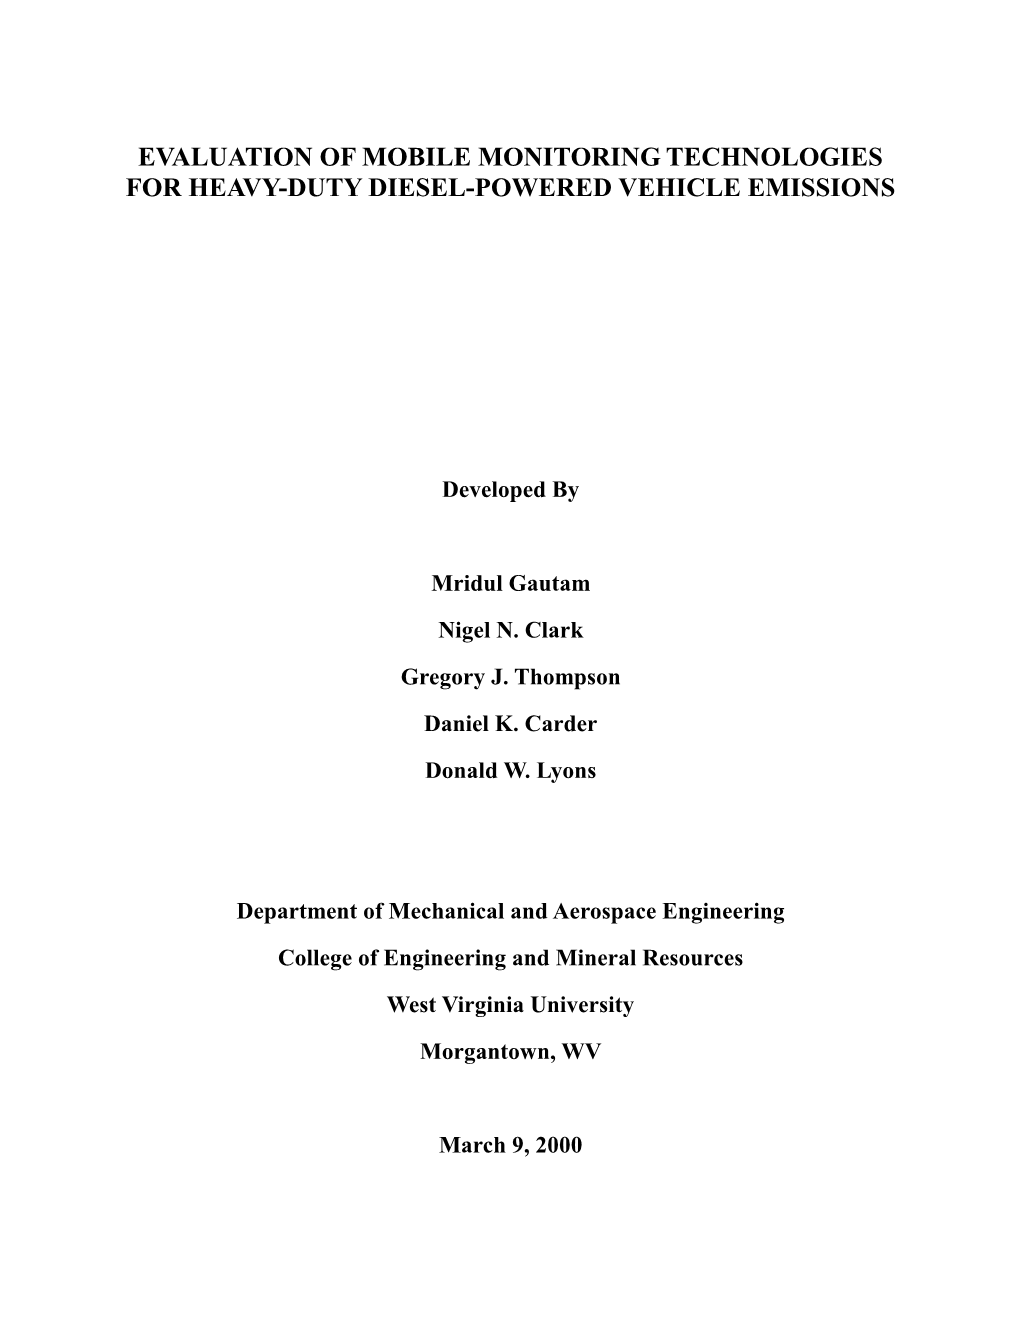 In-Use Test Program for Diesel Engine Consent Decree